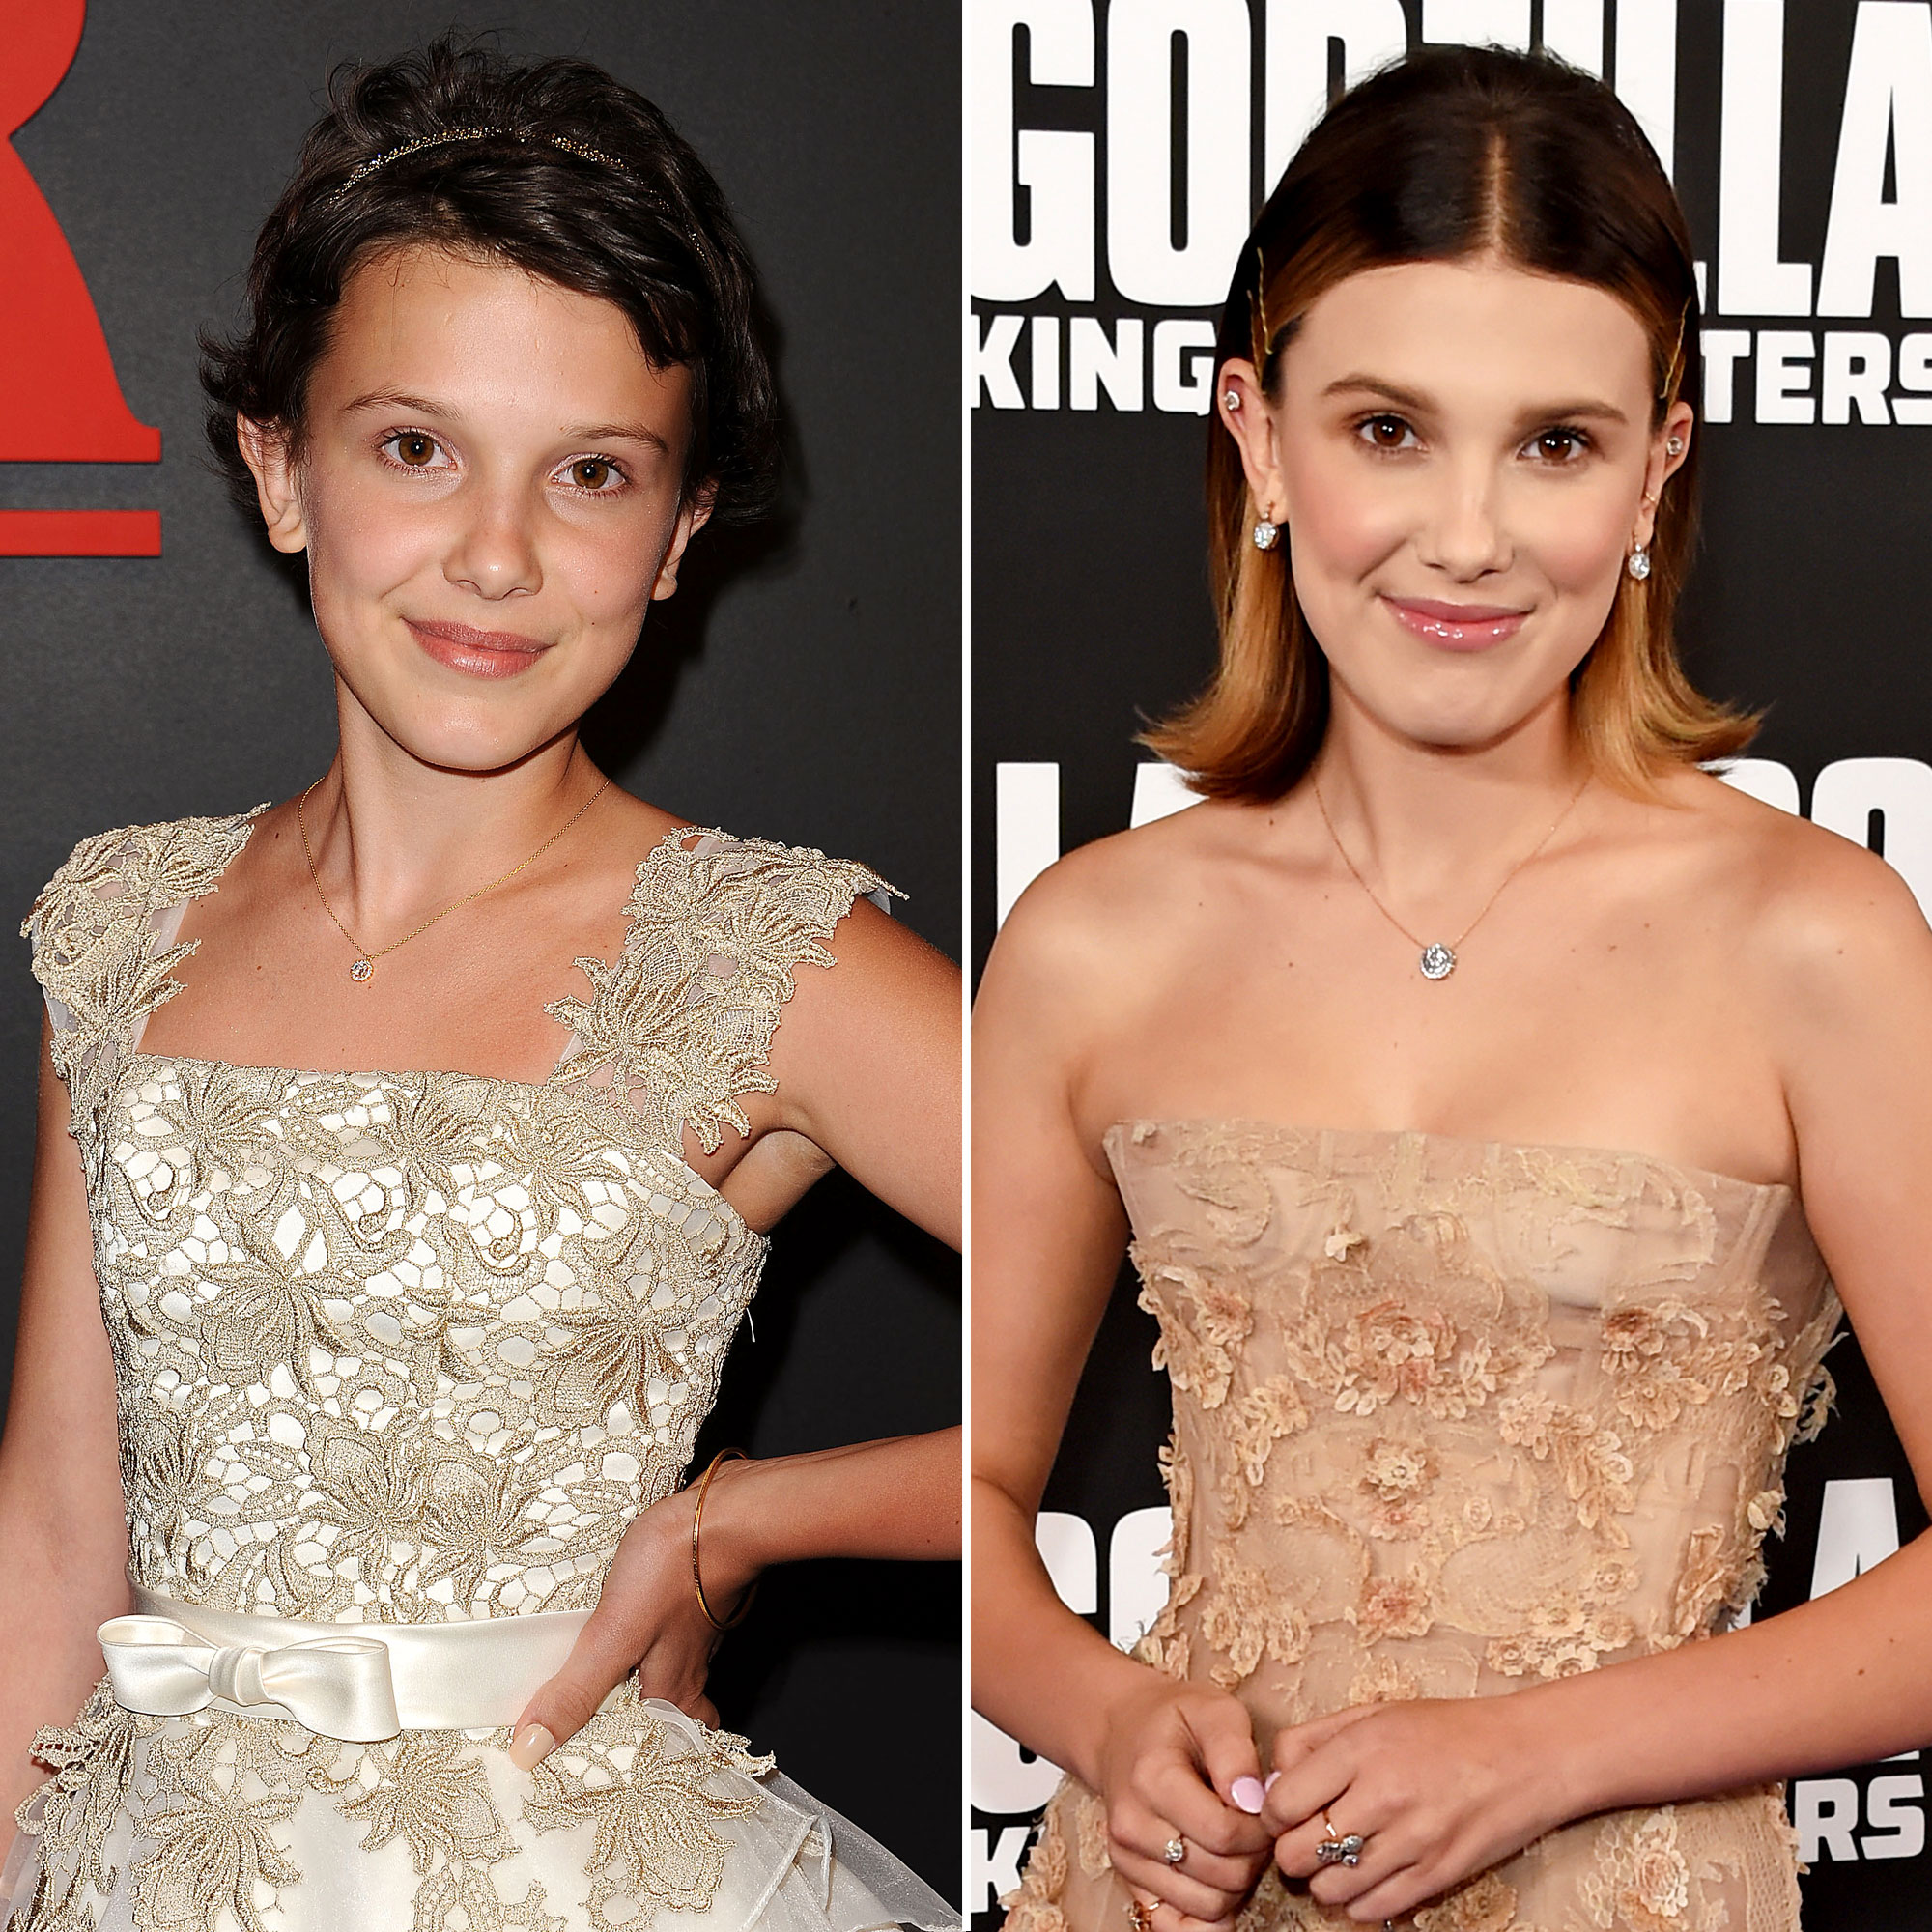 eleven stranger things actress